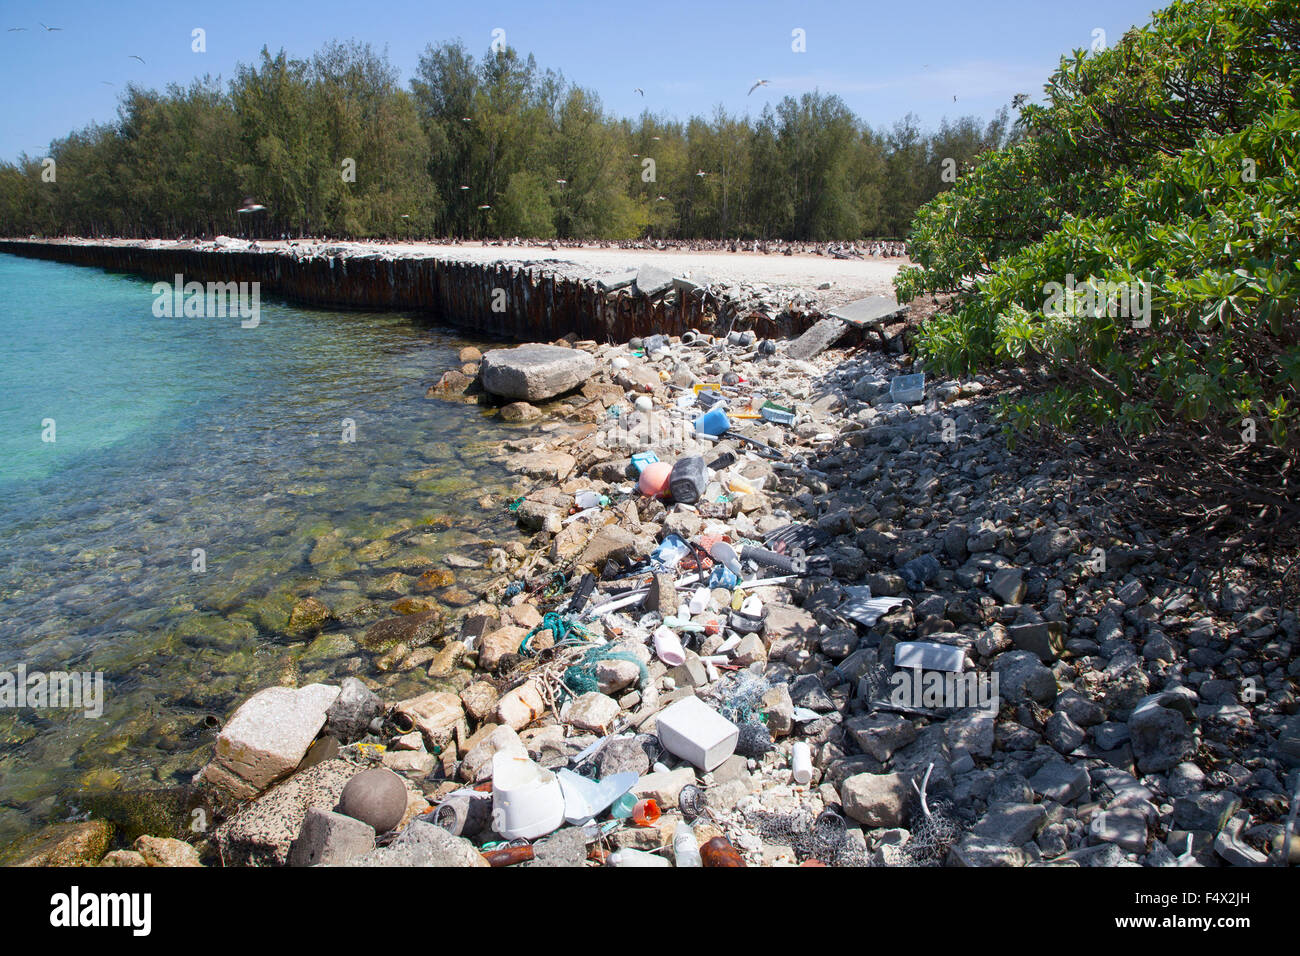 Plastic and glass marine debris washed ashore in the harbor of a North Pacific island Stock Photo